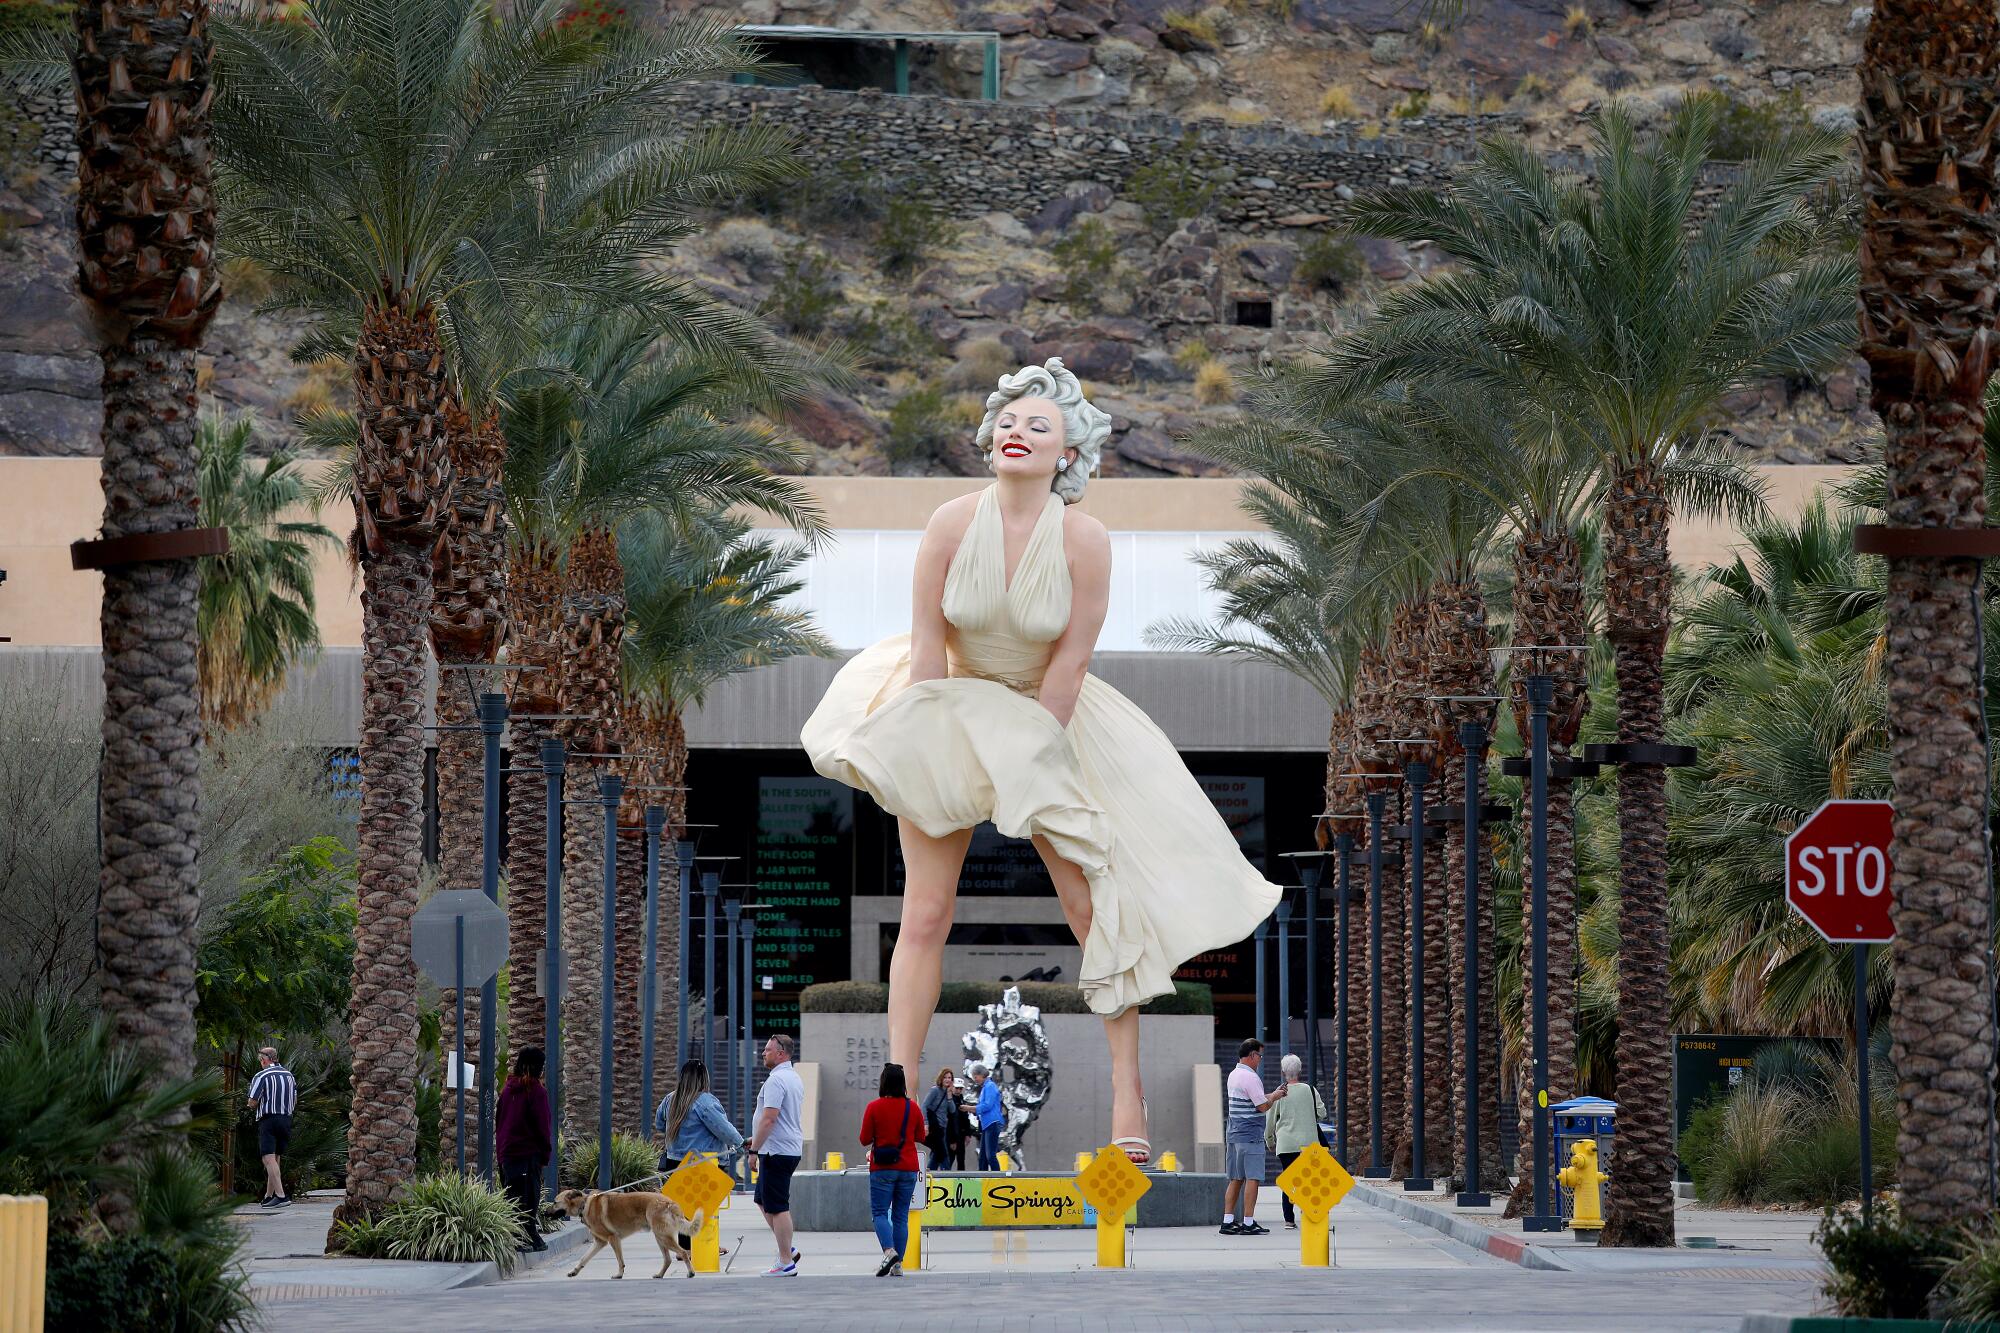 People walk by the giant 'Forever Marilyn' sculpture in downtown Palm Springs.